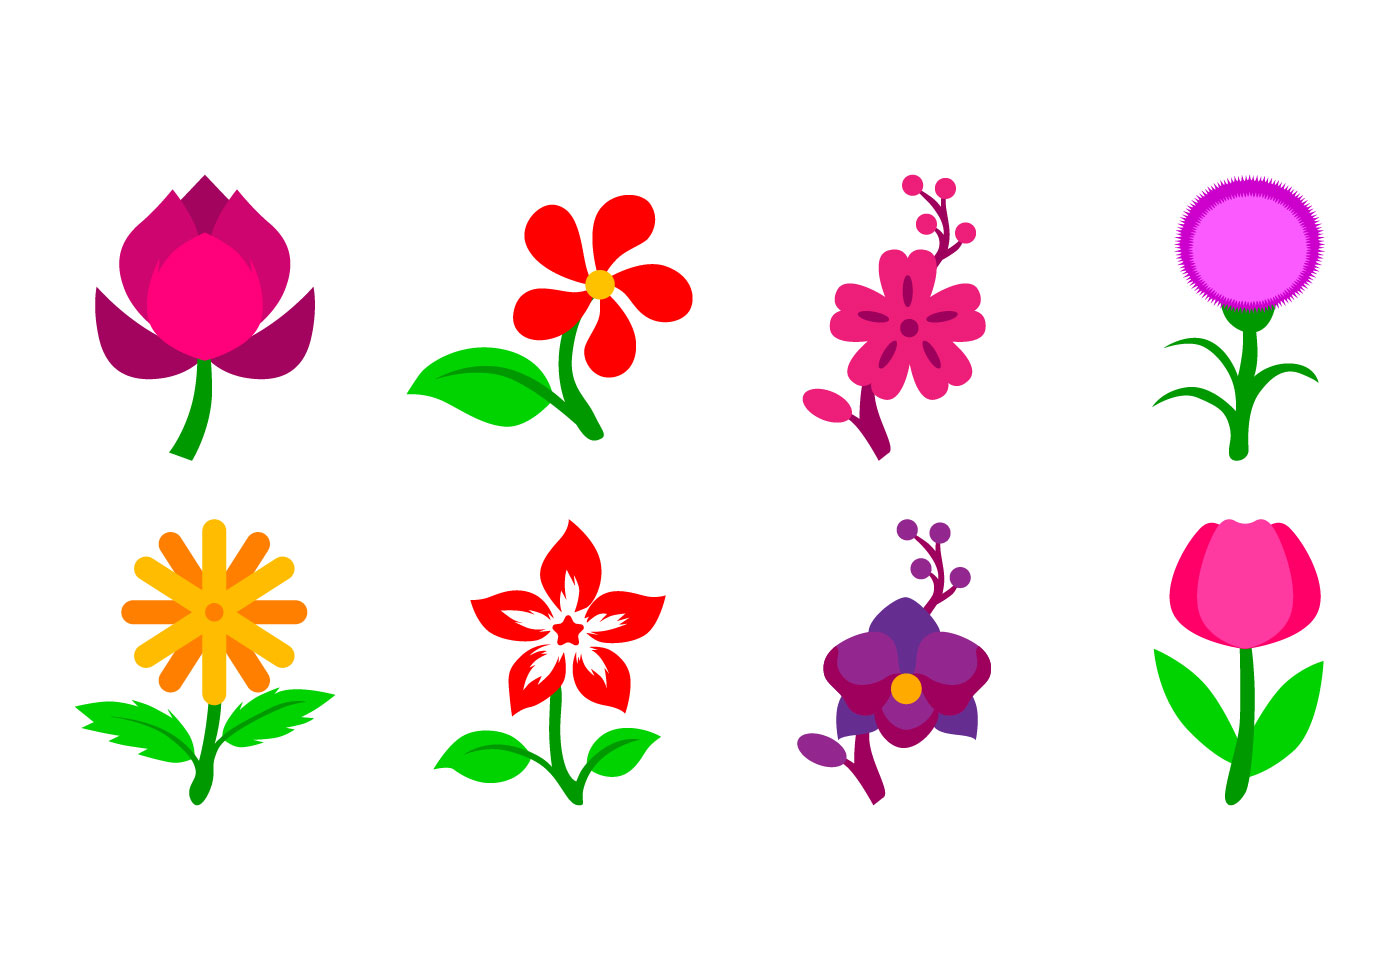 Carnation Vector - Download Free Vector Art, Stock Graphics & Images